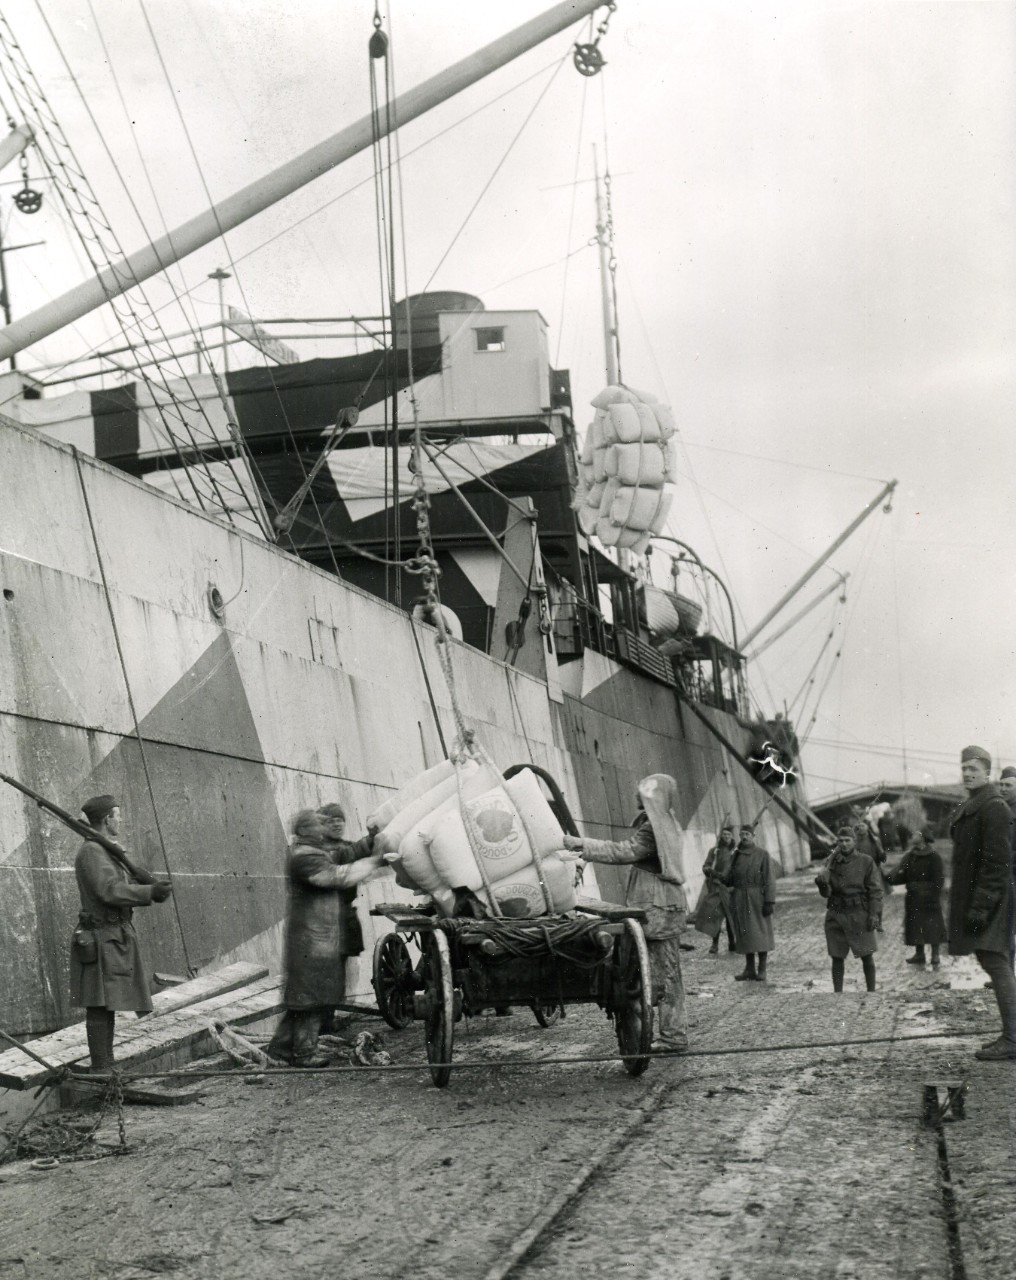 111-SC-34629: Unloading grain from U.S. Cargo Ship Ascutney at Archangel, October 15, 1918. U.S. Army Photograph, now in the collections of the National Archives.